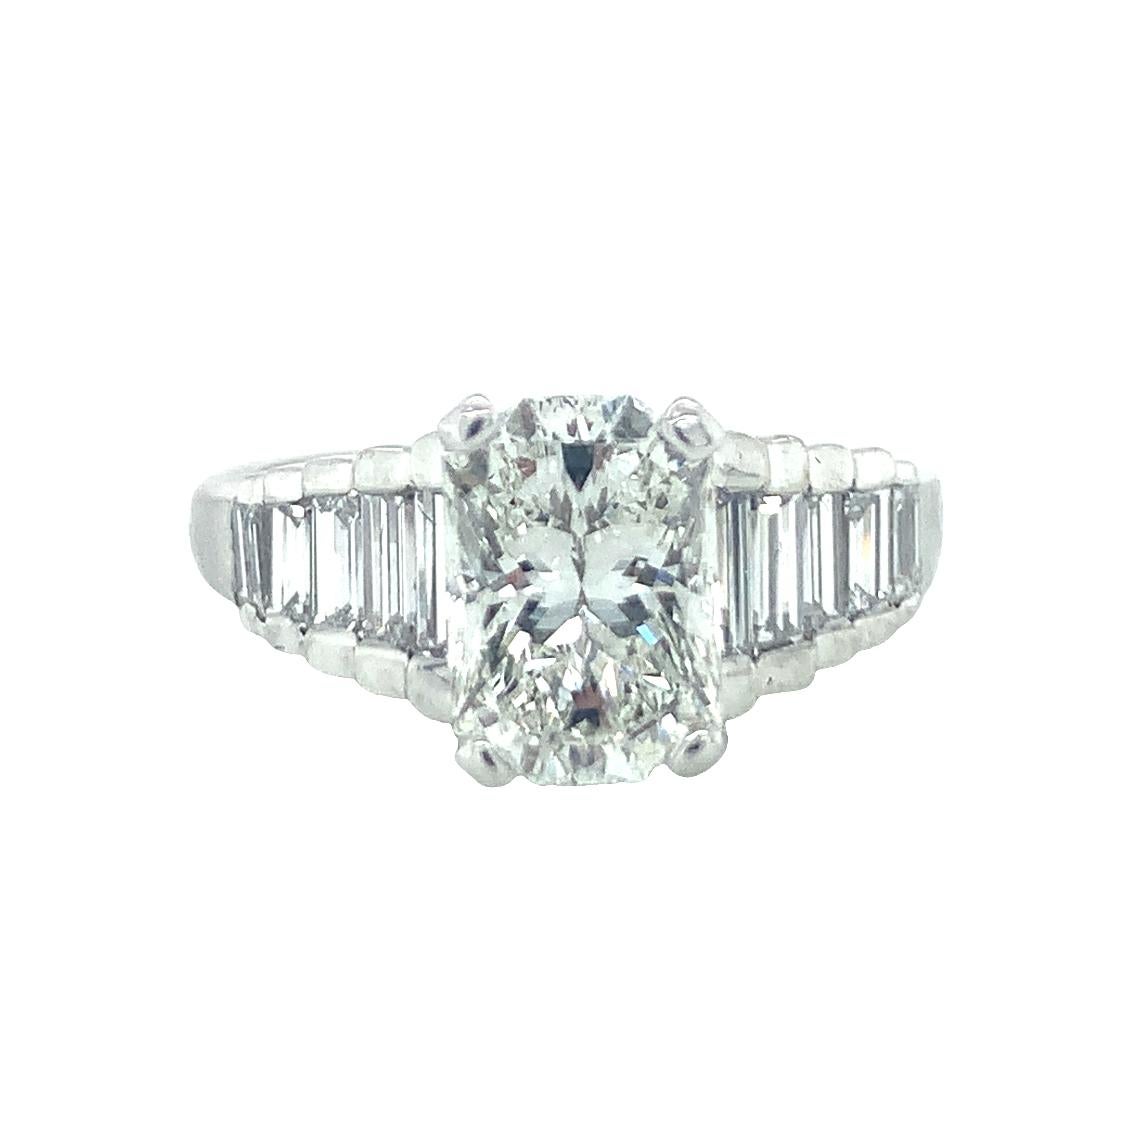 GIA Certified 1.79 Carat Diamond Platinum Engagement Ring In Excellent Condition For Sale In Beverly Hills, CA